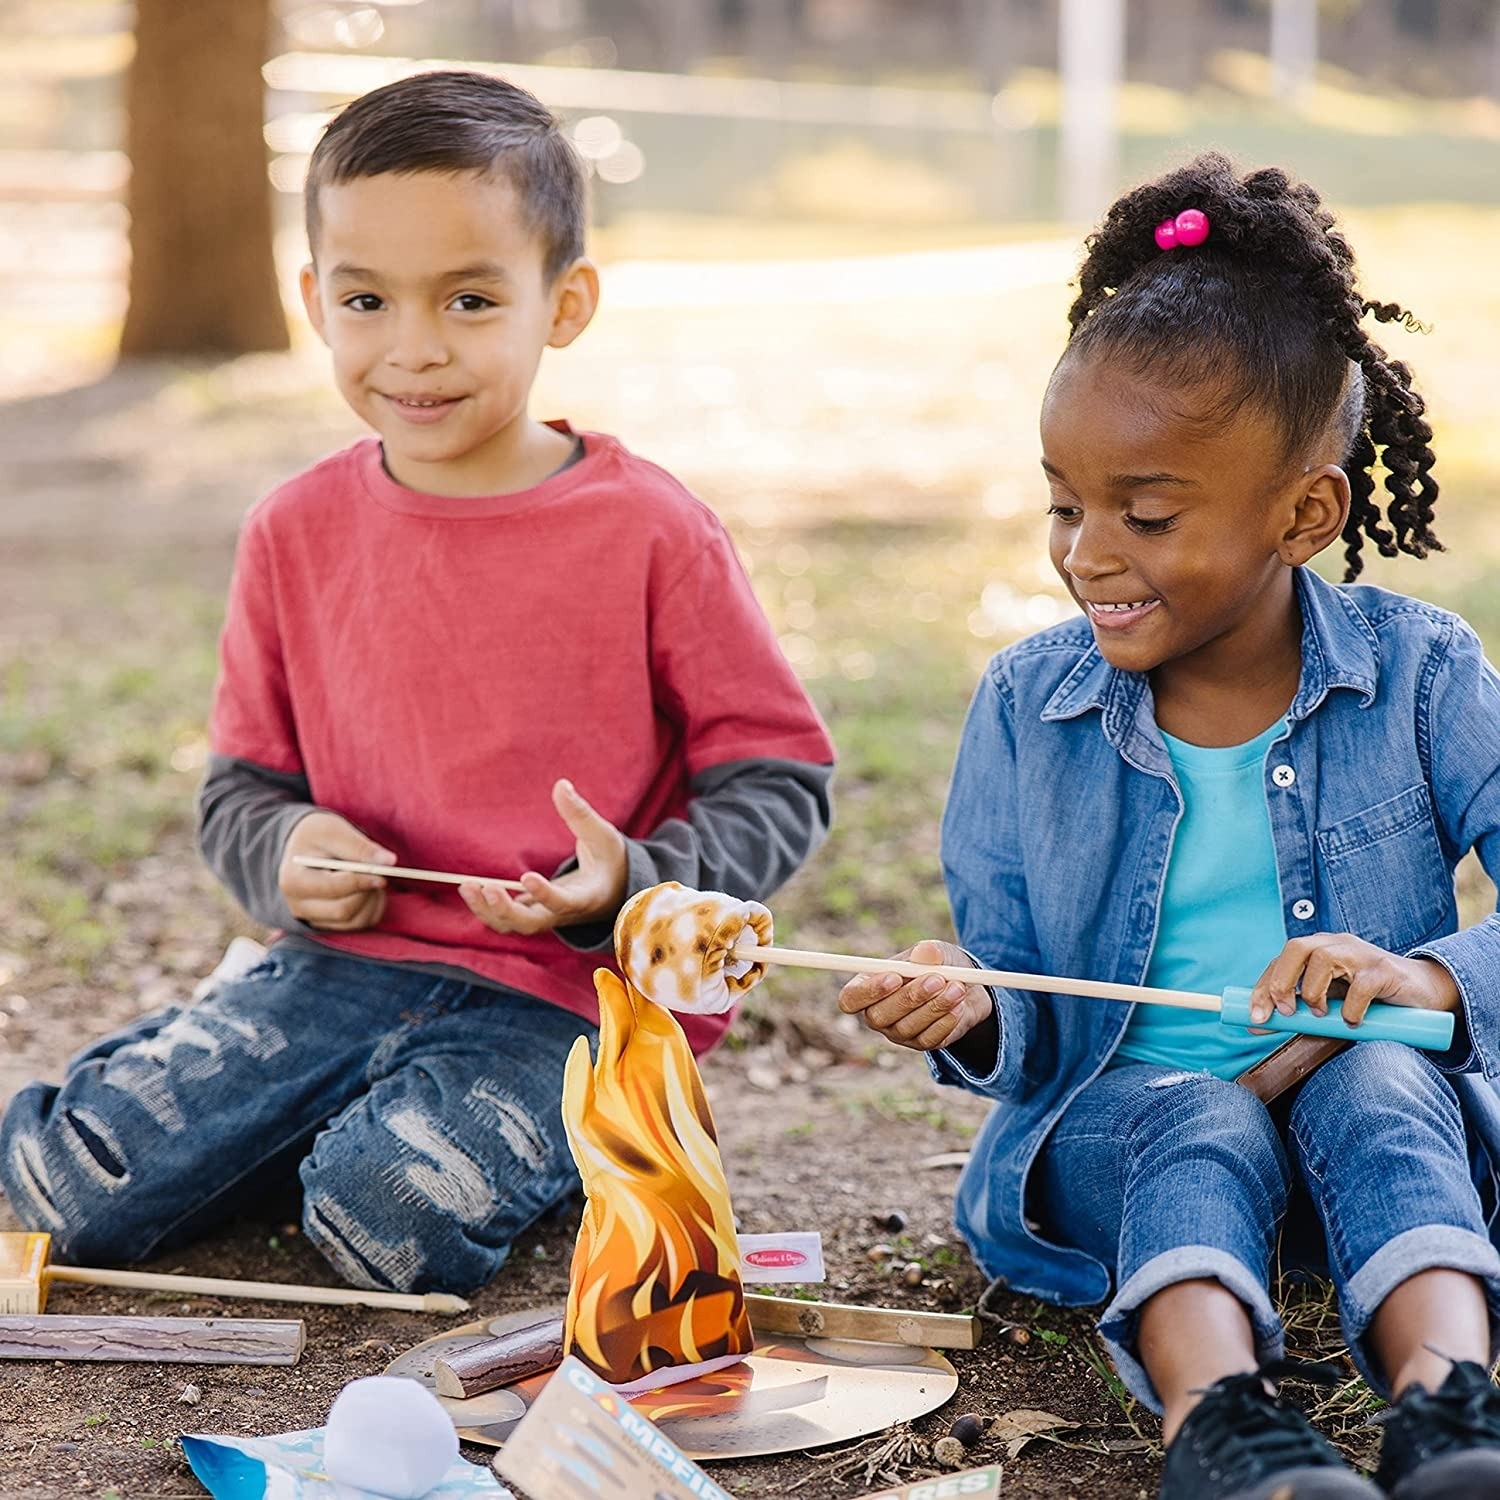 Two kid models play with campfire set